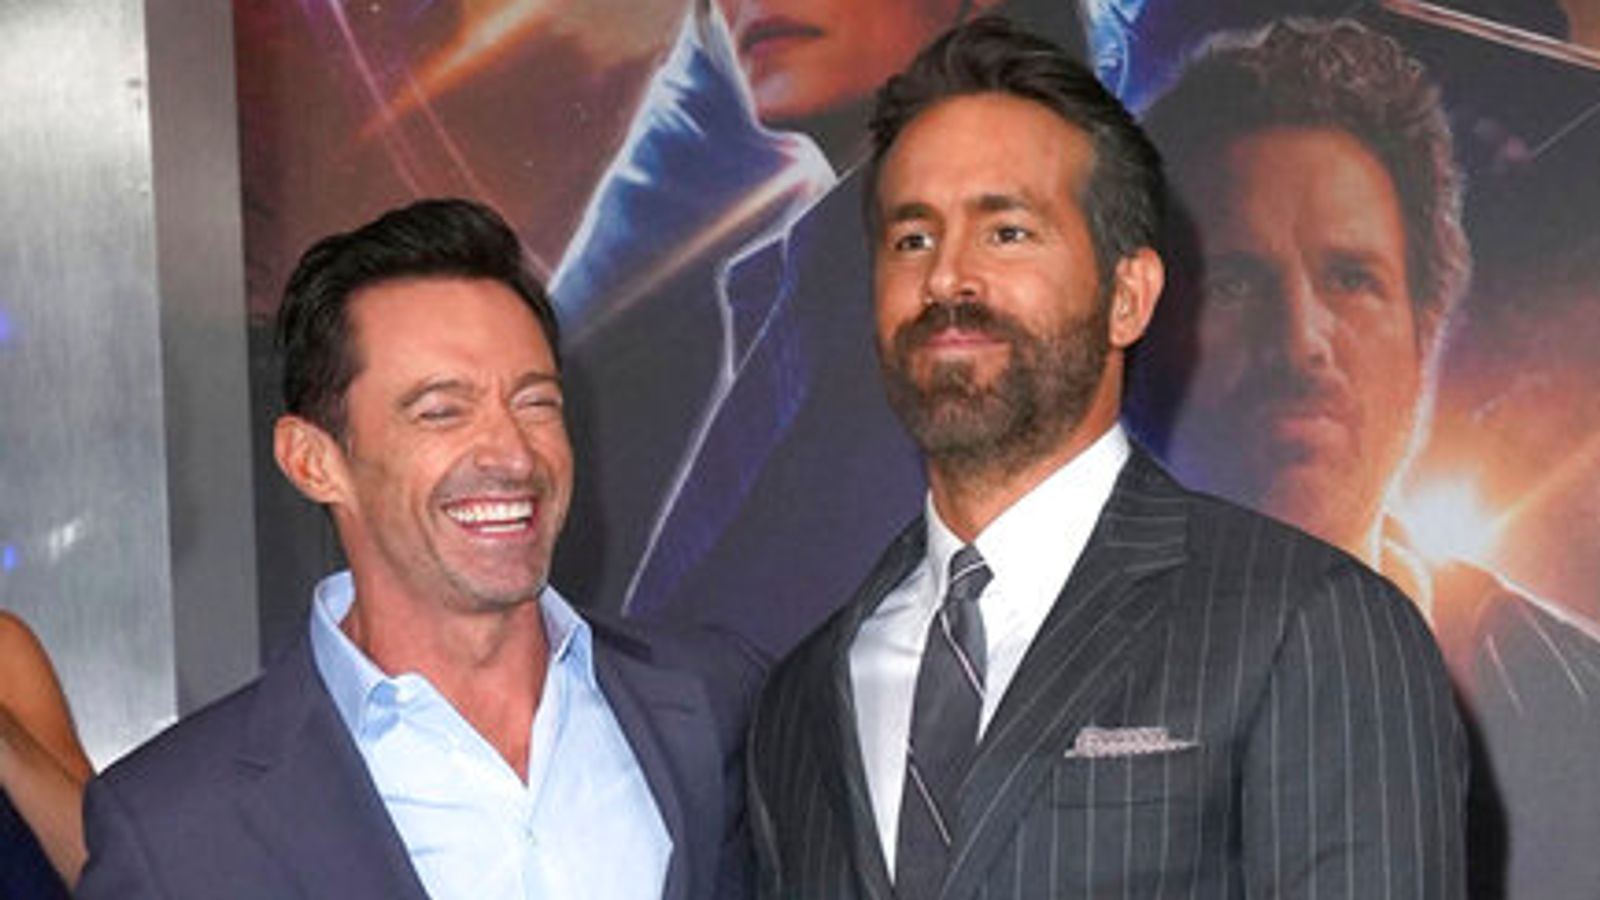 Deadpool 3 With Wolvie: Ryan Reynolds And Hugh Jackman Have One